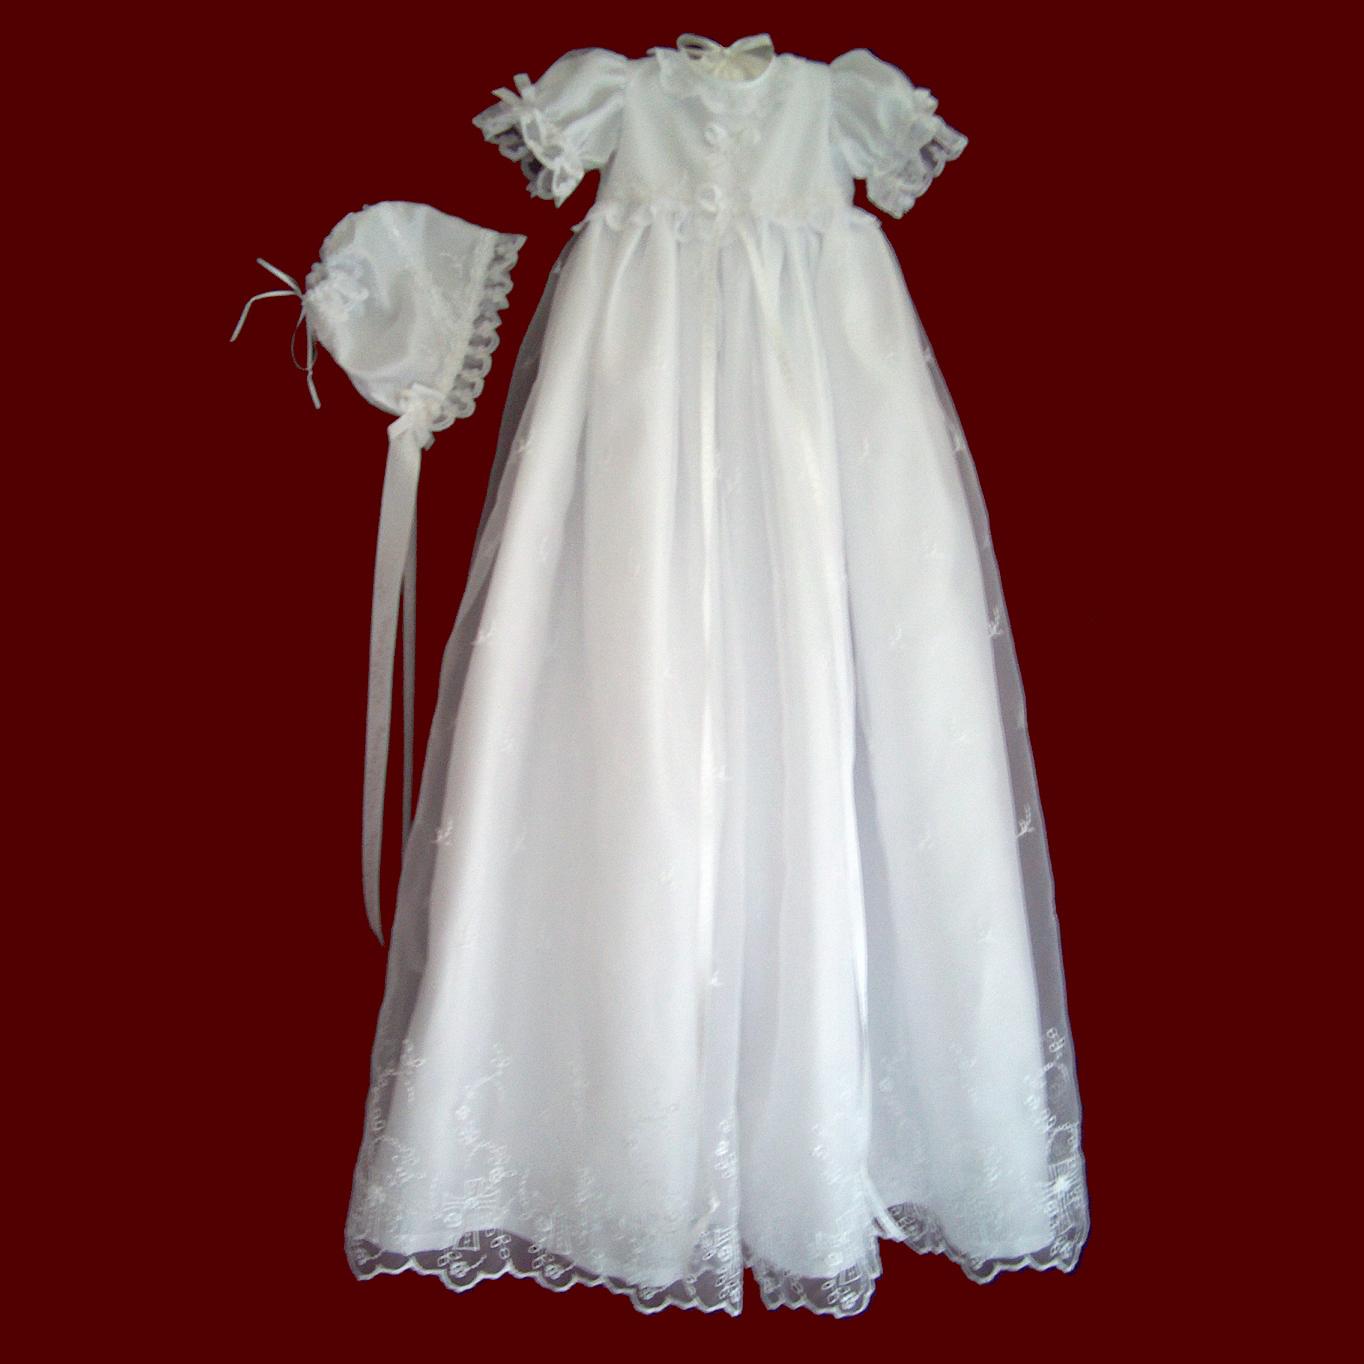 Embroidered Organza With Crosses & Shamrocks Christening Gown & Bonnet